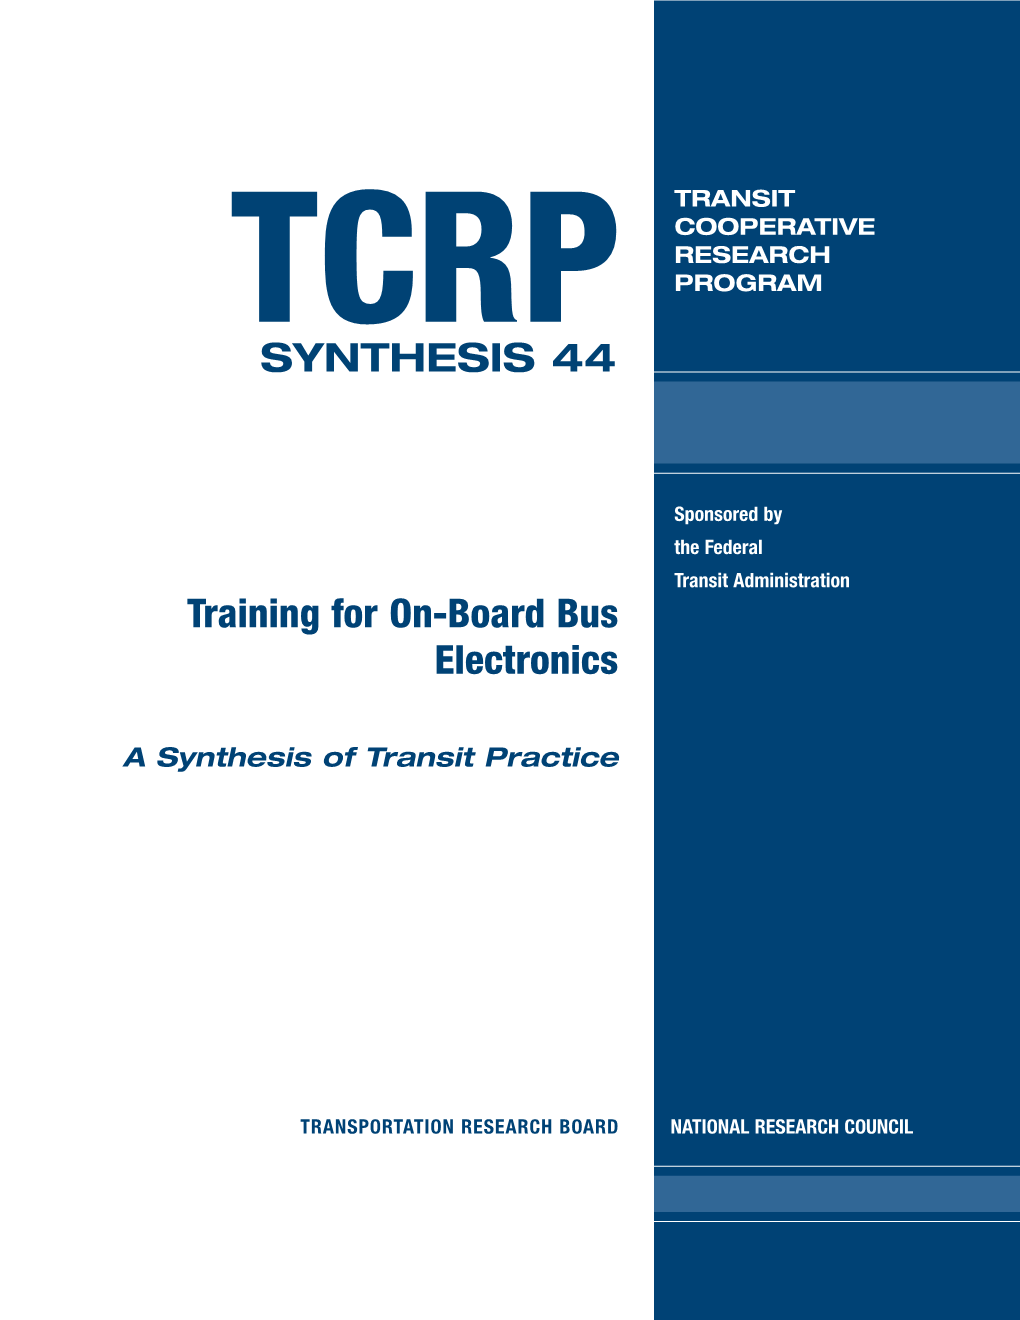 TCRP Synthesis 44: Training for On-Board Bus Electronics